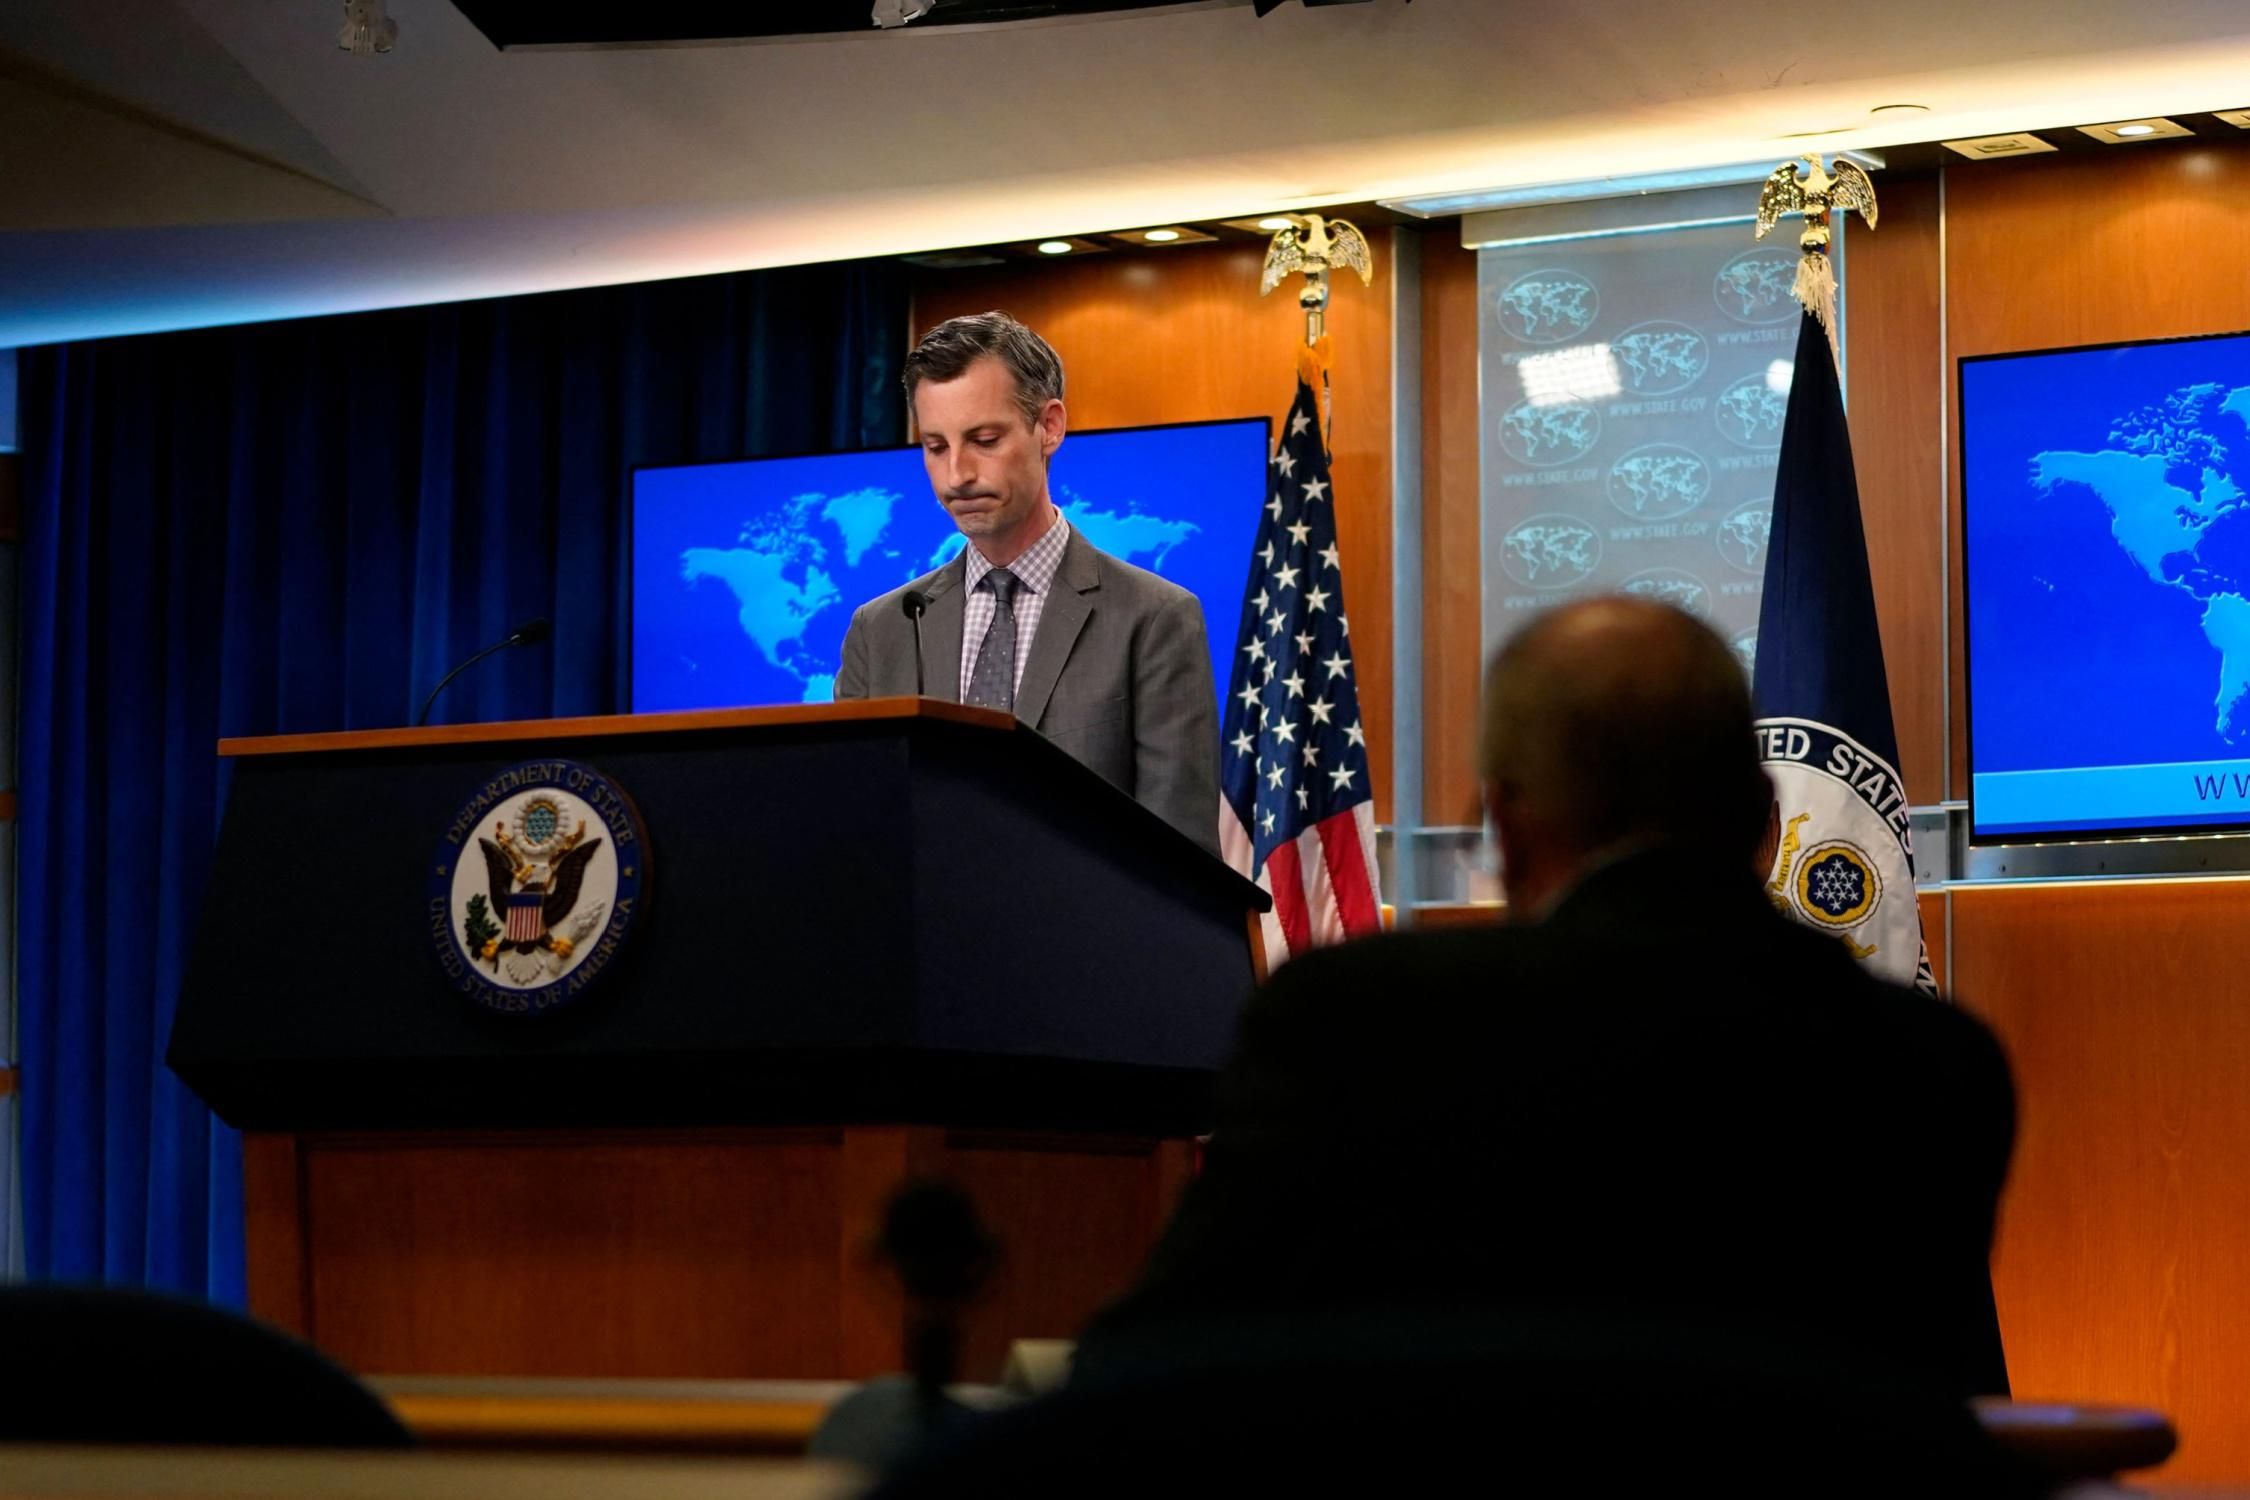 U.S. State Department spokesman Ned Price listens to questions from reporters during a press briefing at the State Department in Washington, D.C. on March 31, 2021.